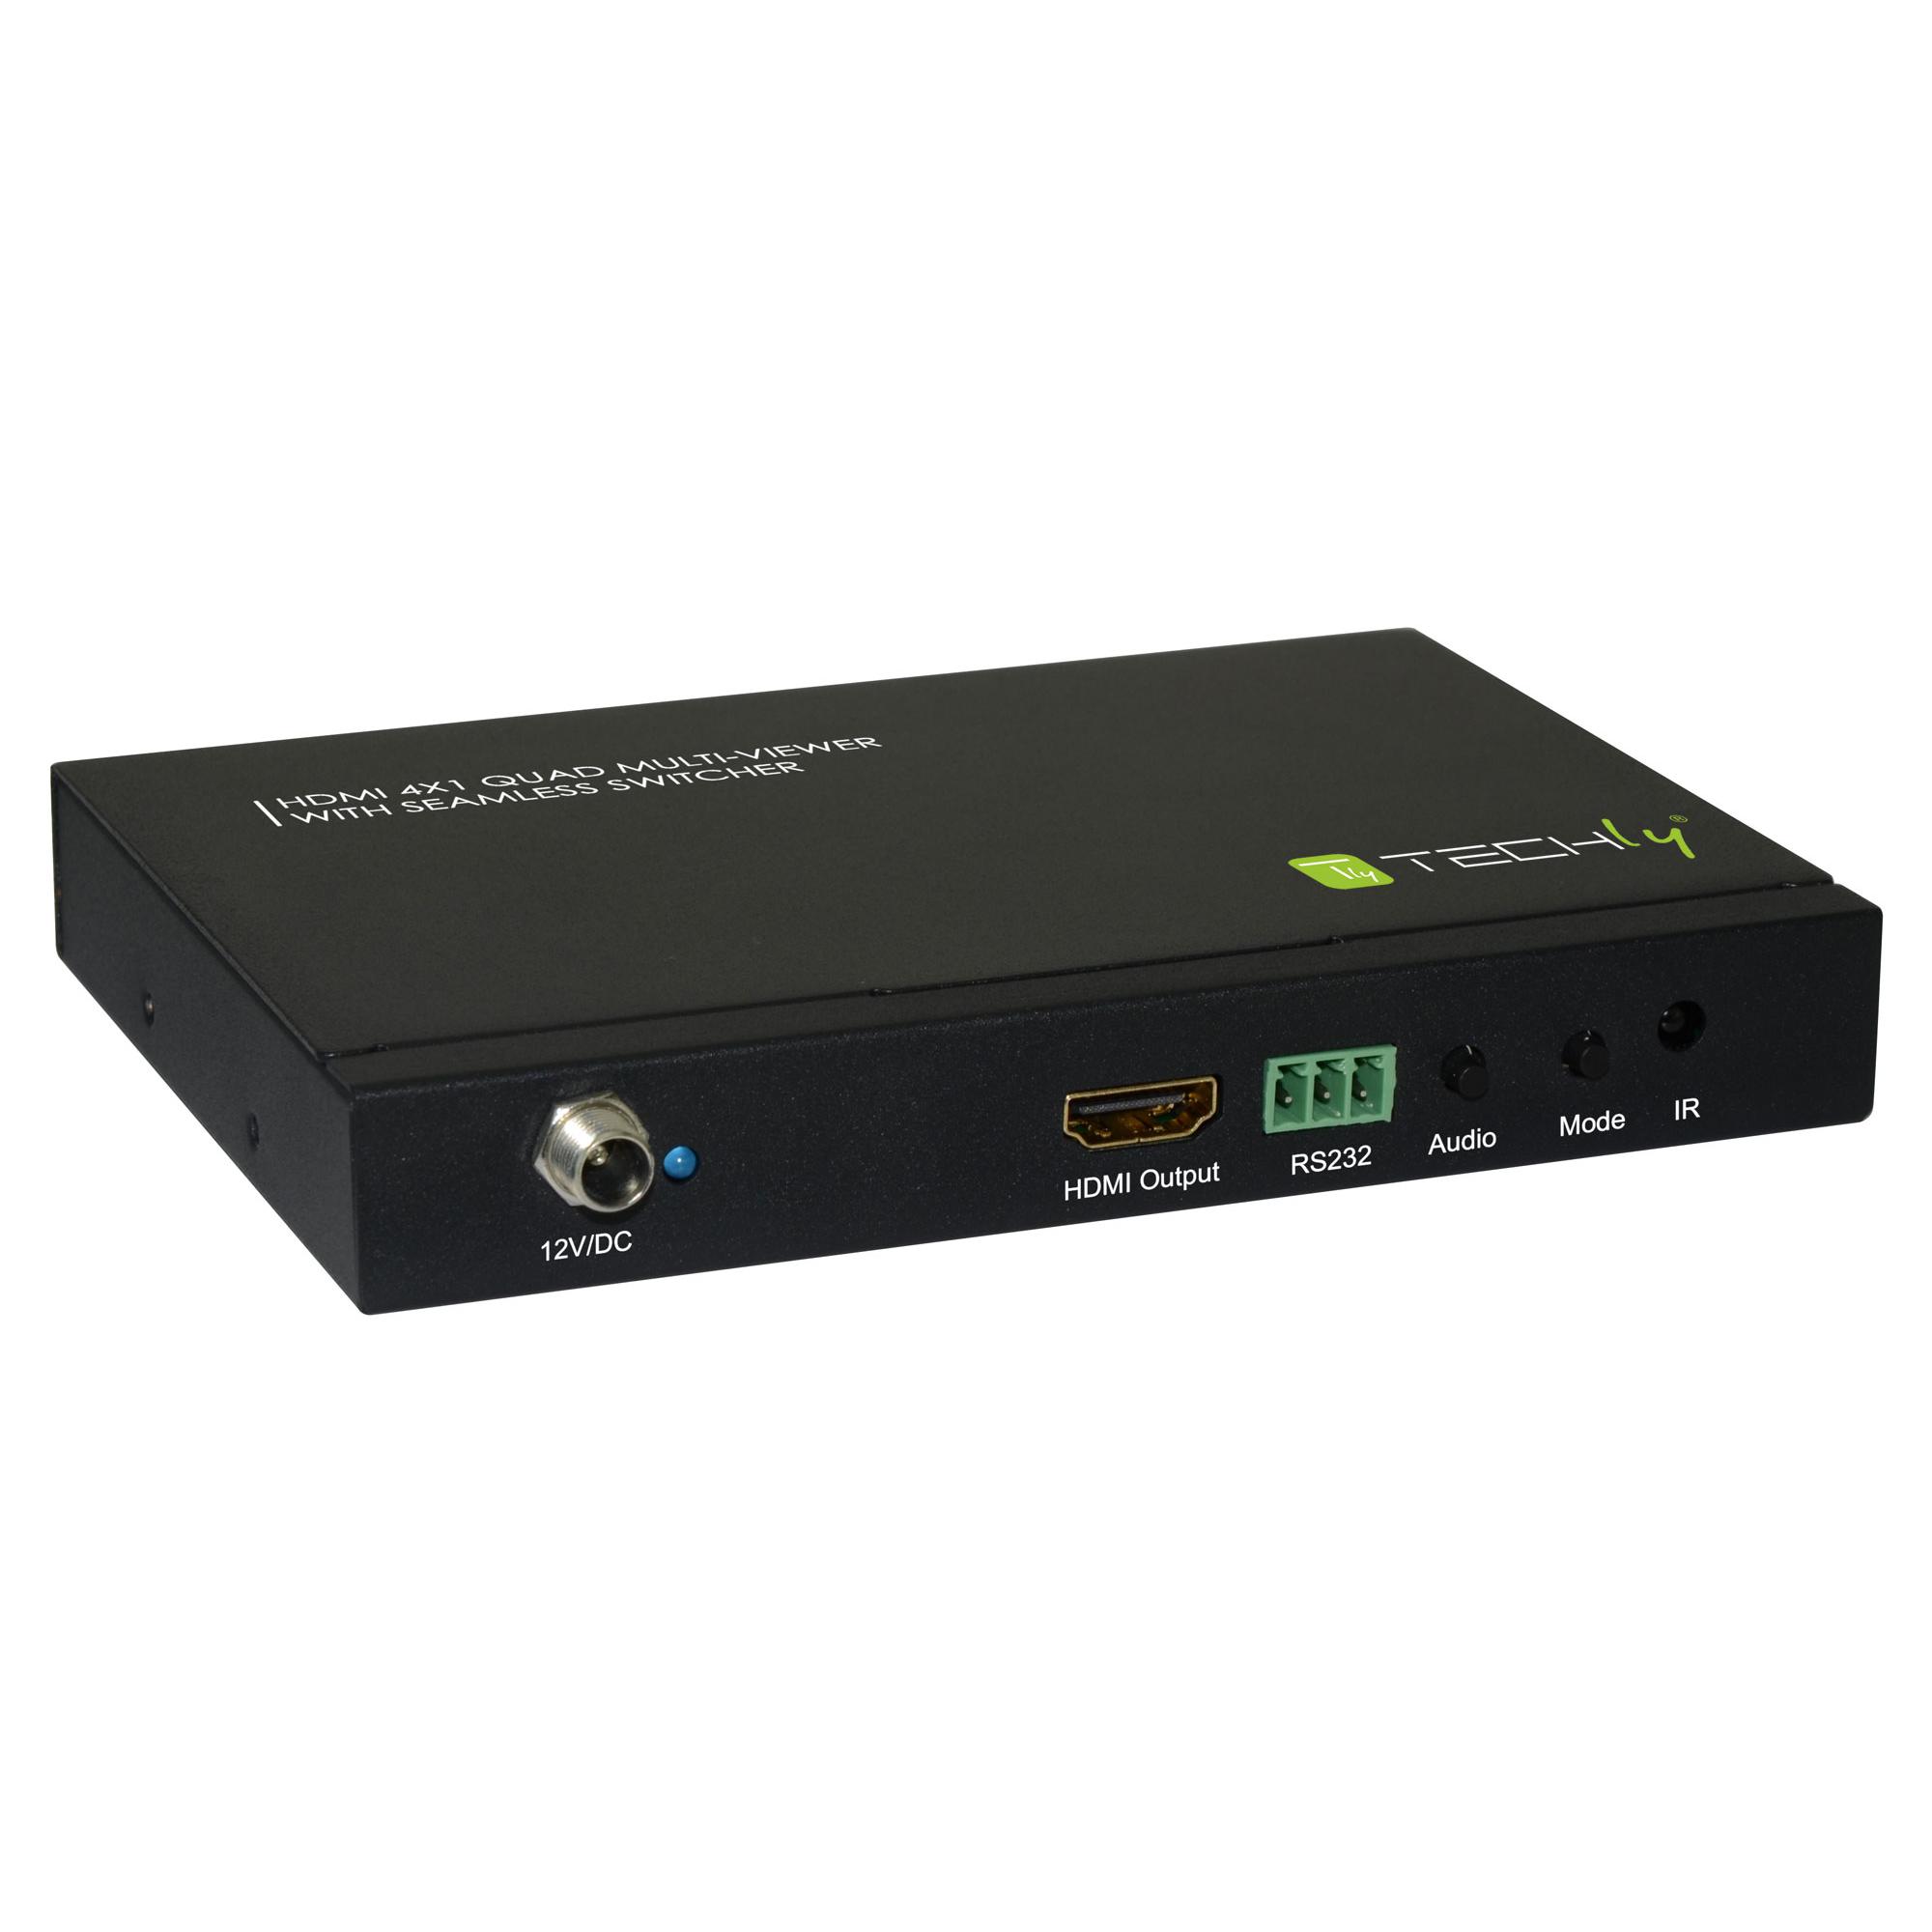 Multiview HDMI 4x1 con switch seamless